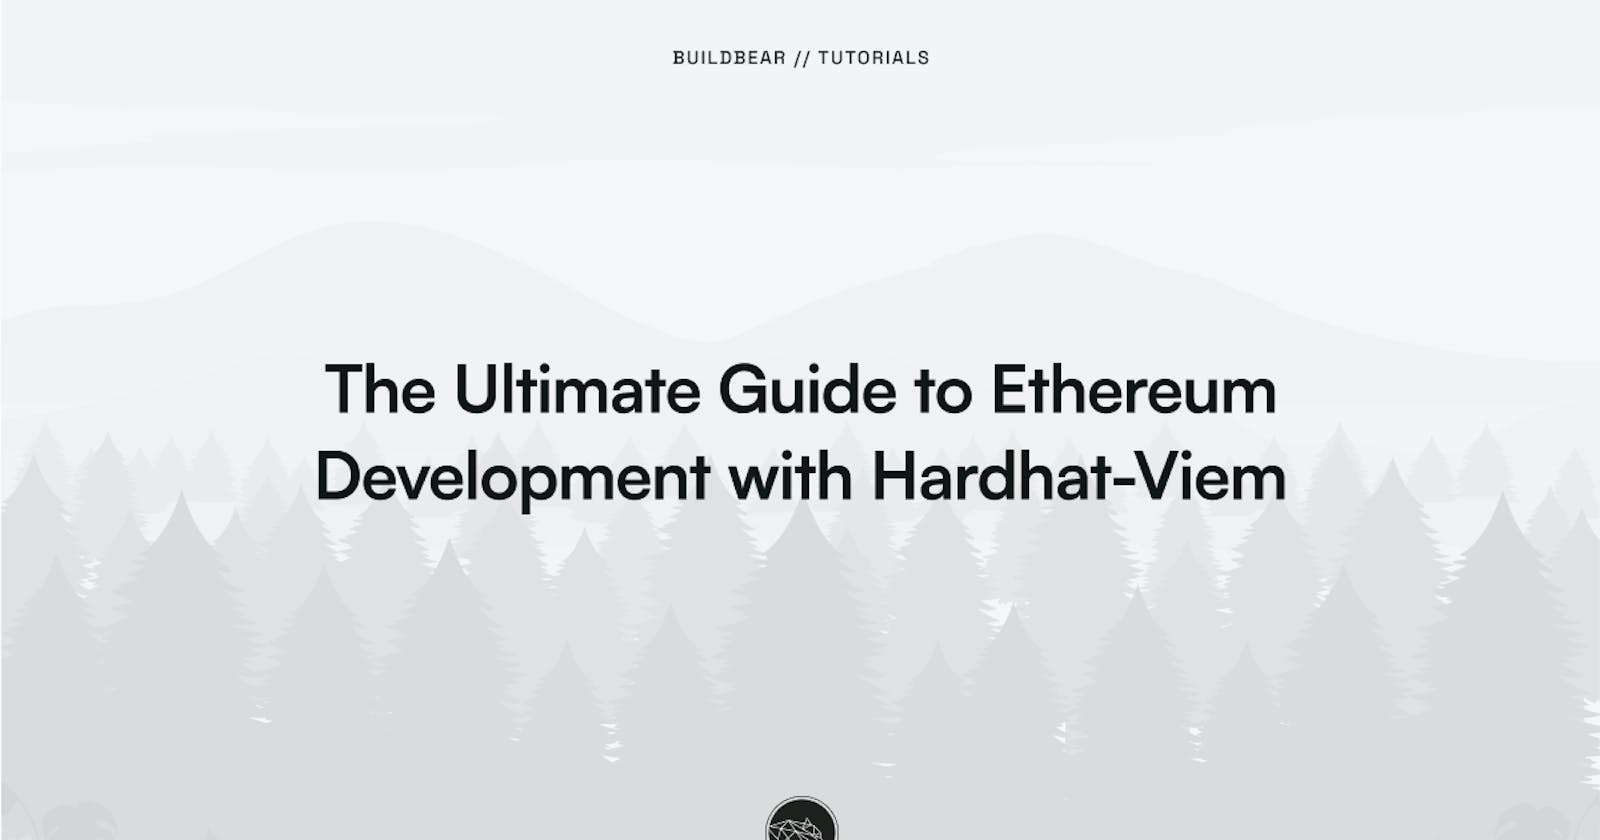 The Ultimate Guide to Ethereum Development with Hardhat-Viem.